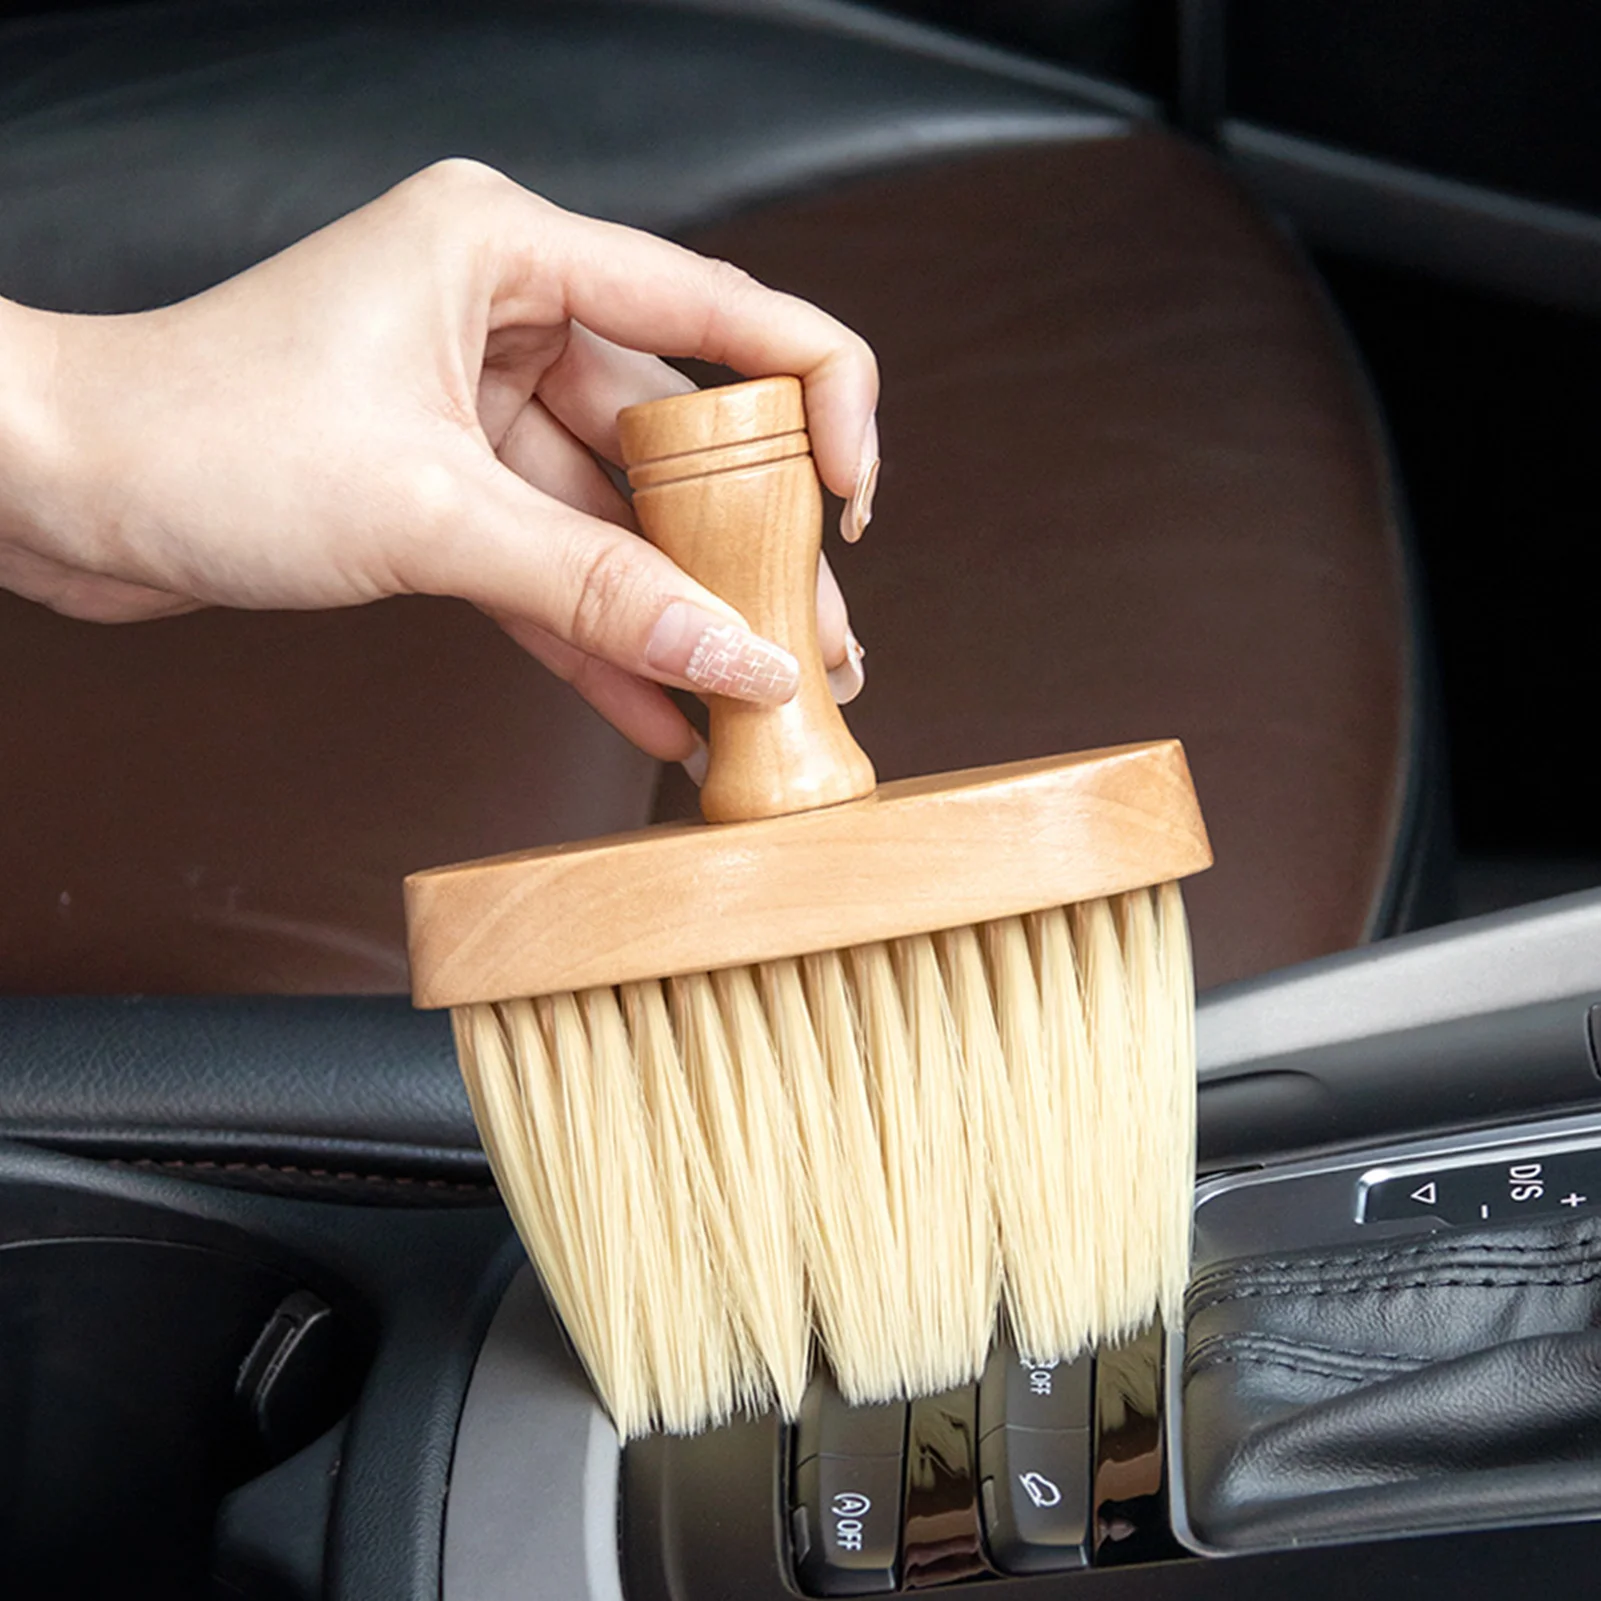 

Duster For Car Air Vent Automotive Air Conditioner Cleaner Brush With Wooden Handle Car Interior No Scratches Detailing Cleaner